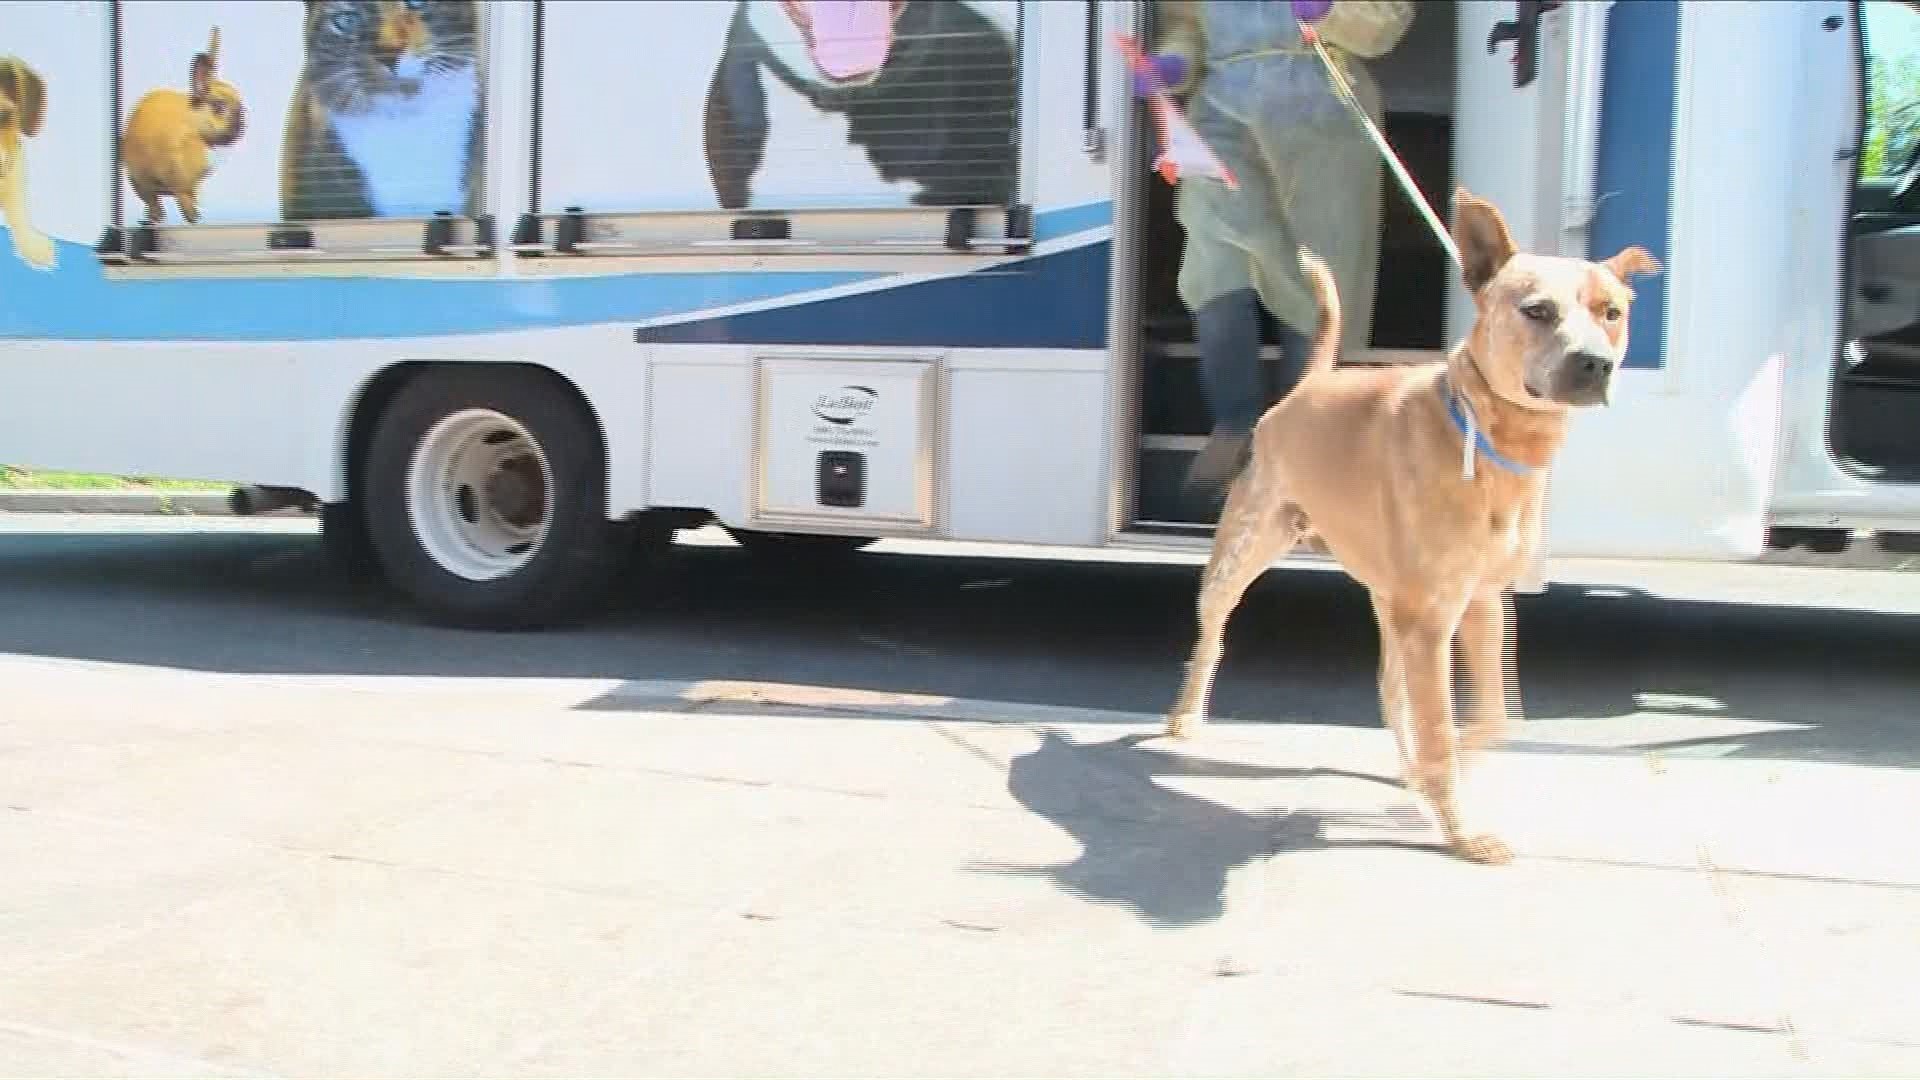 There were 130 animals brought from Oklahoma.